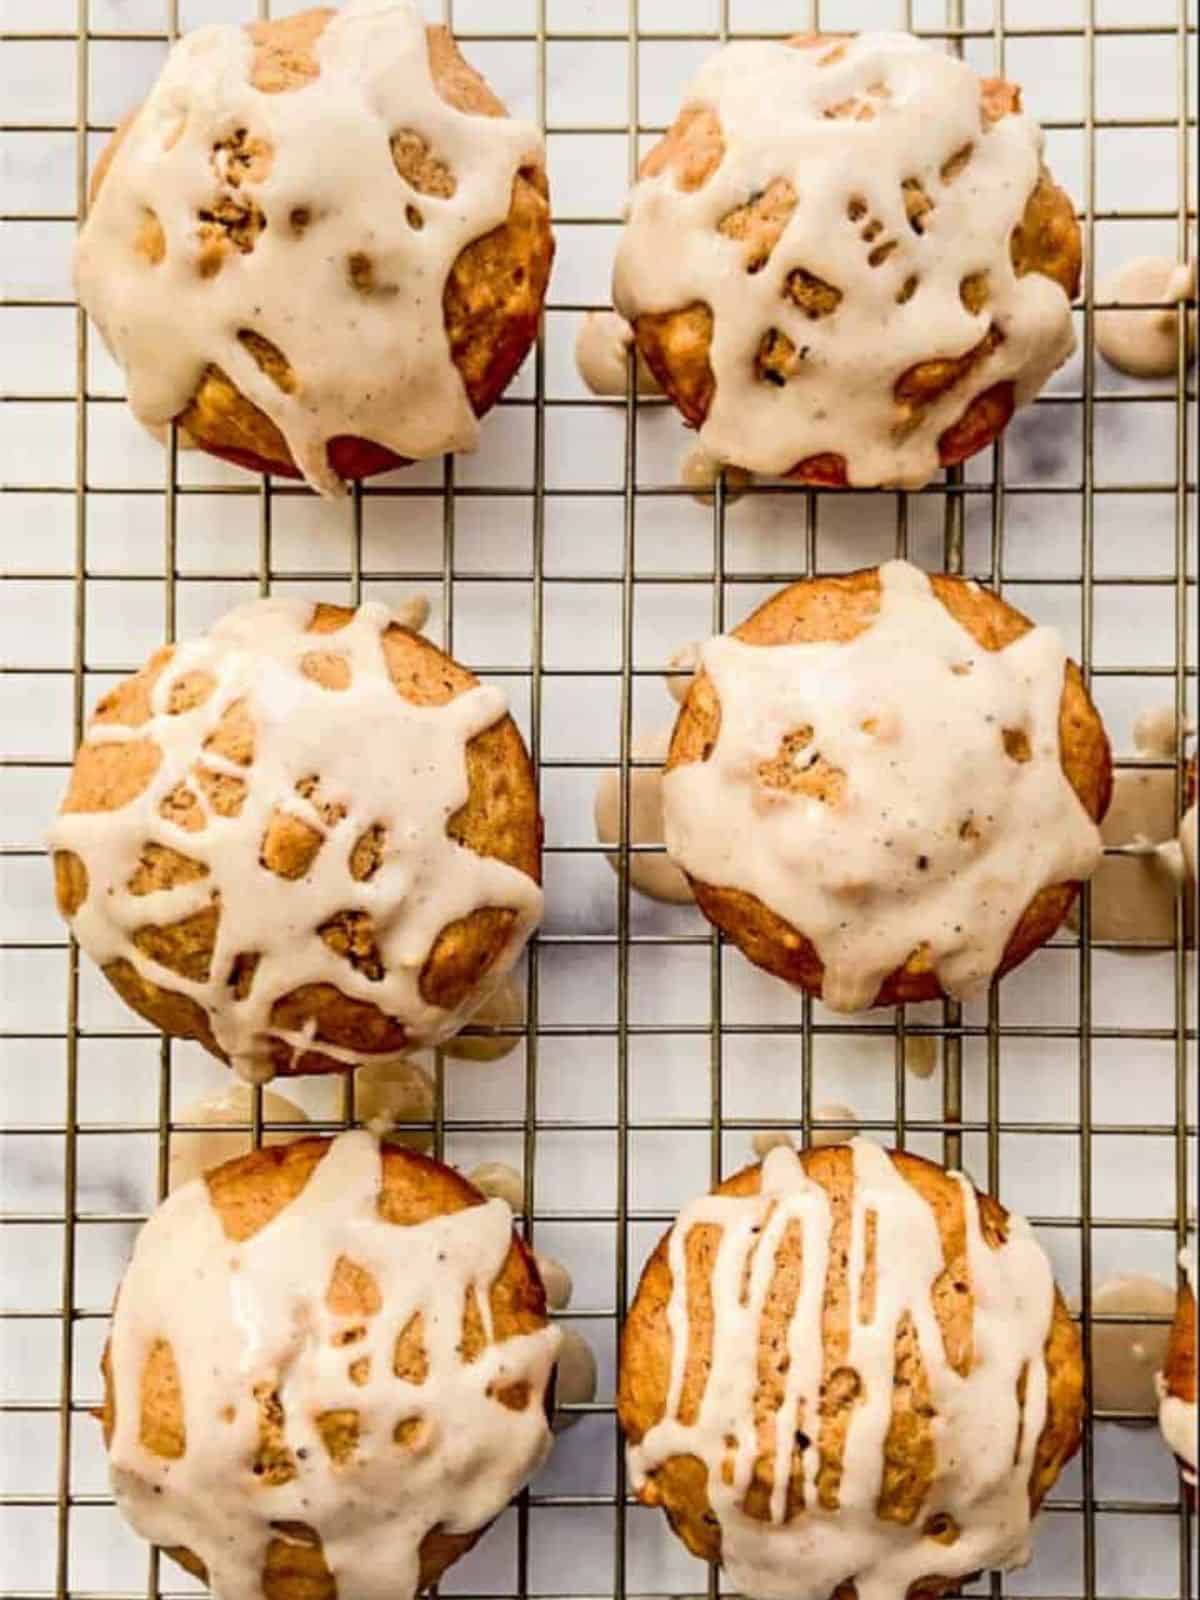 freshly baked chai spiced banana muffins on a baking tray, topped with glaze.